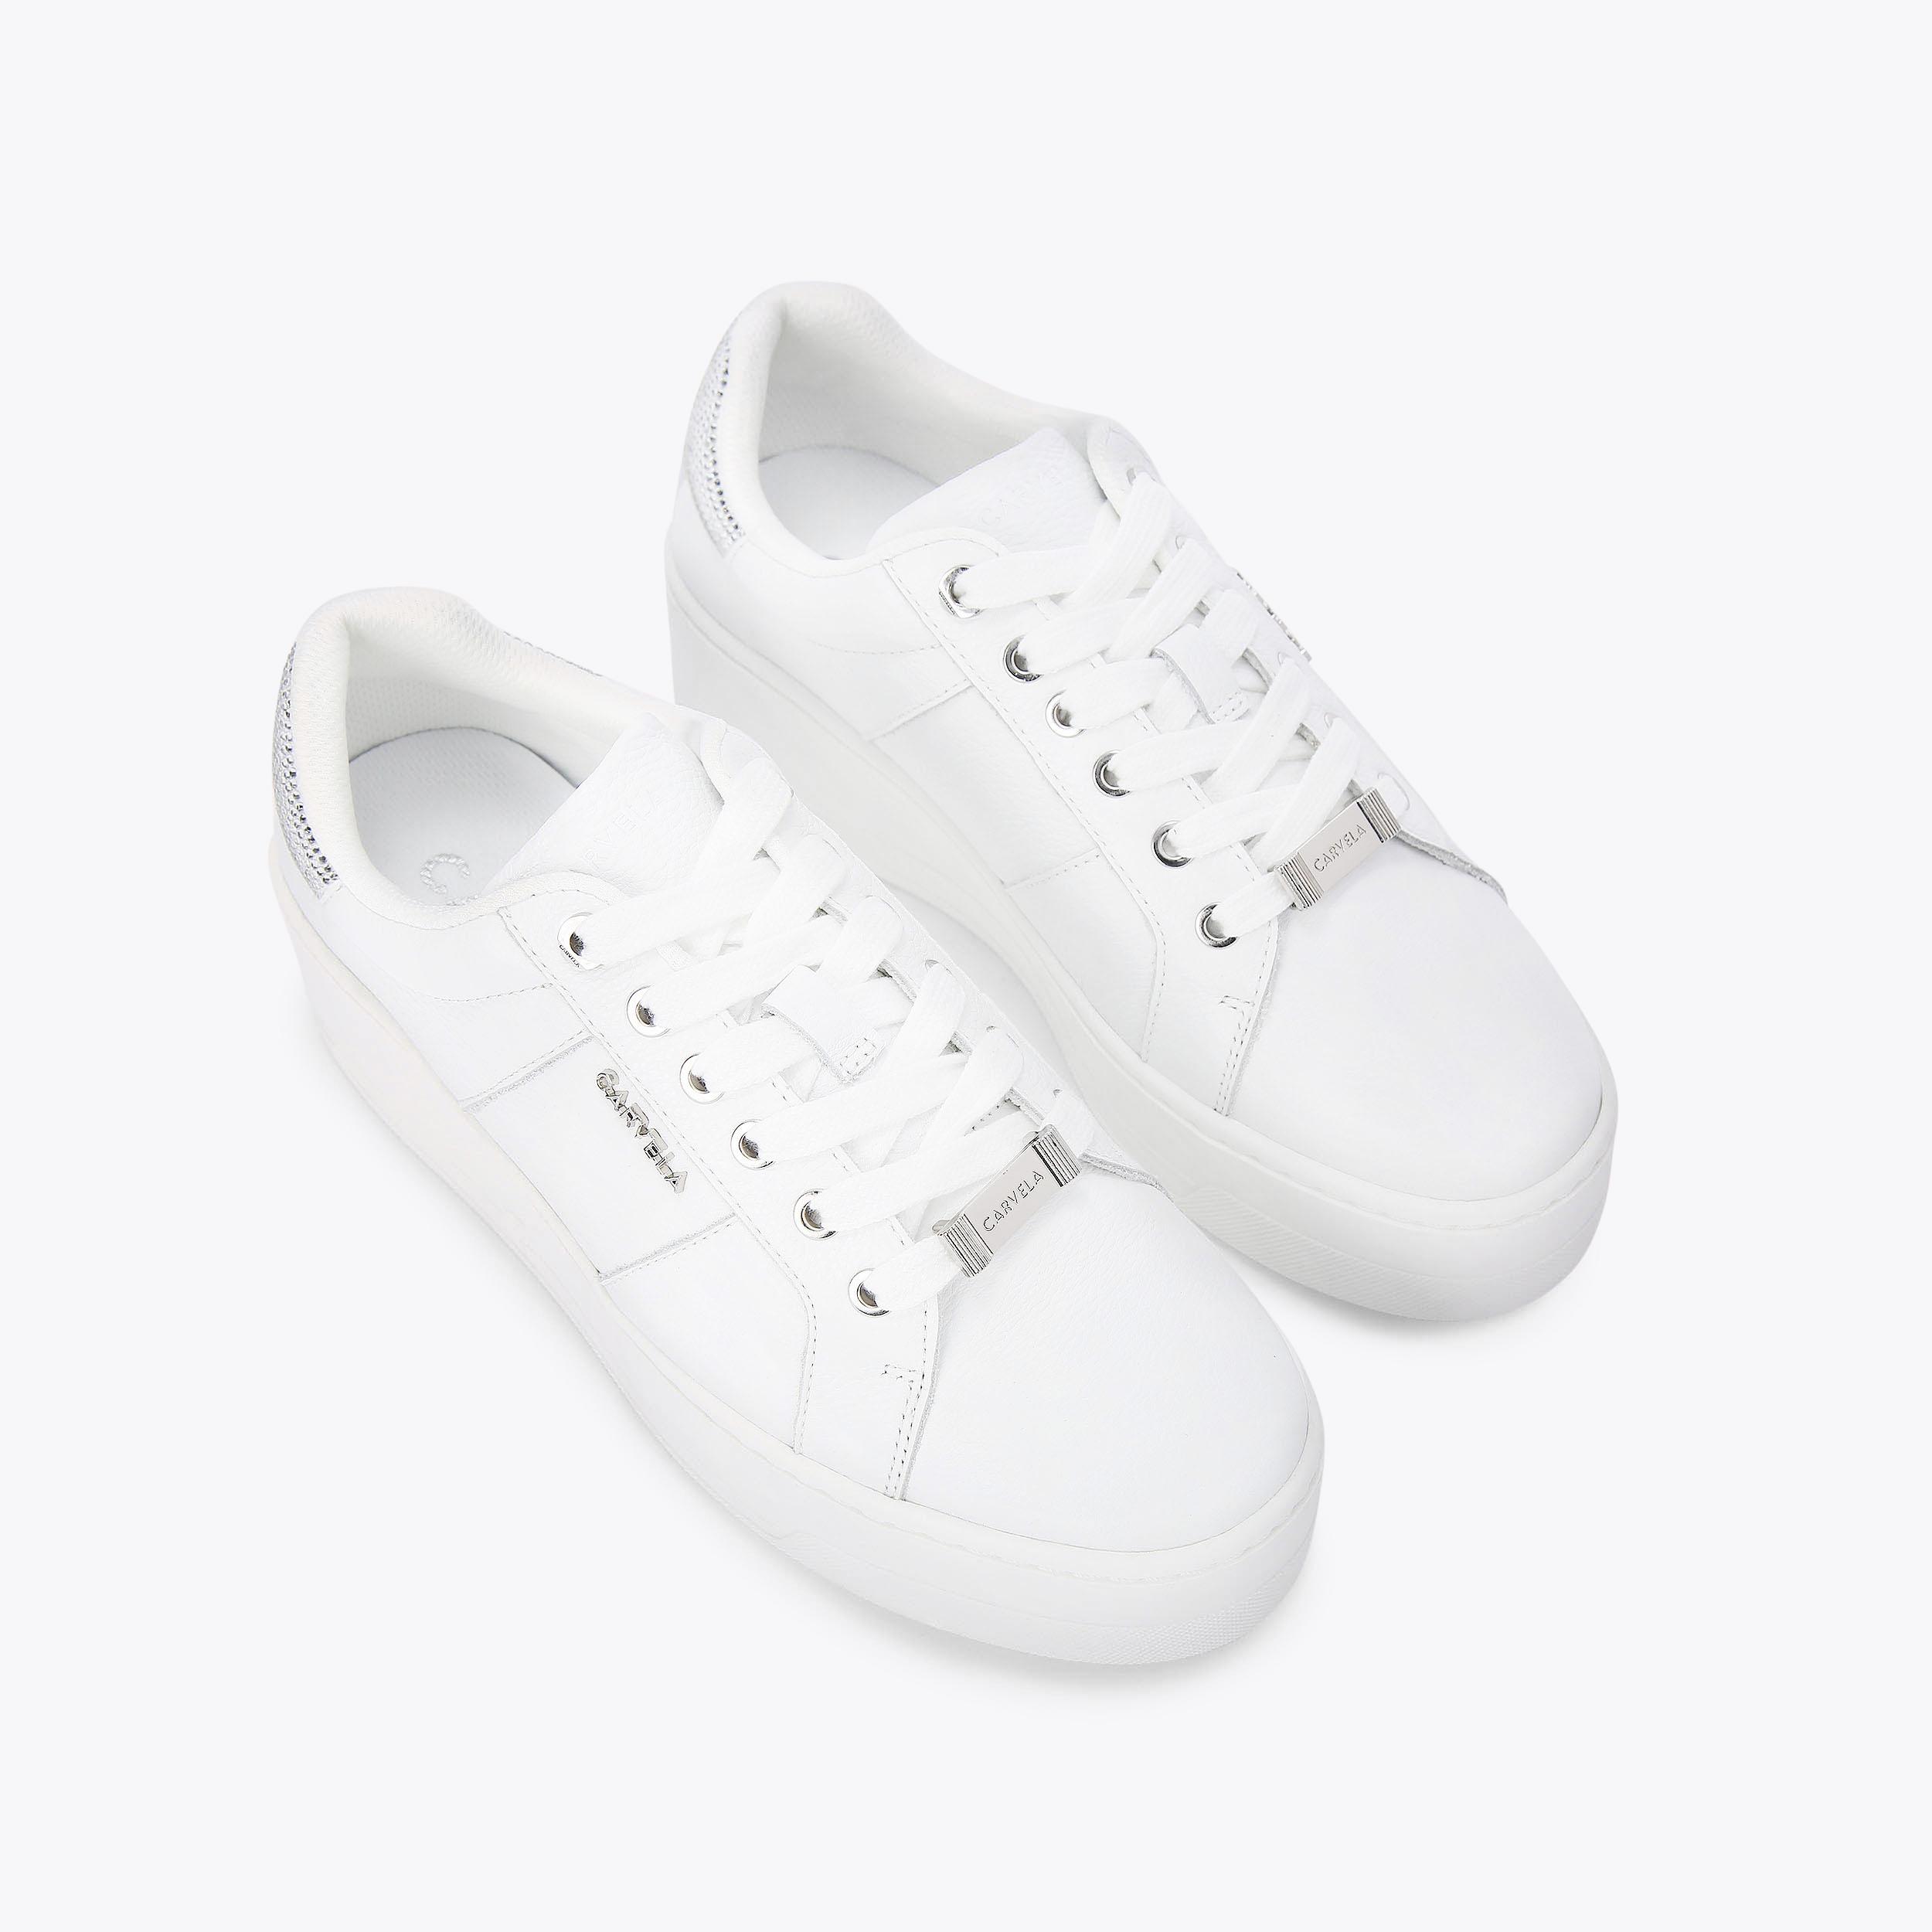 CONNECTED White Leather Lace Up Trainer by CARVELA